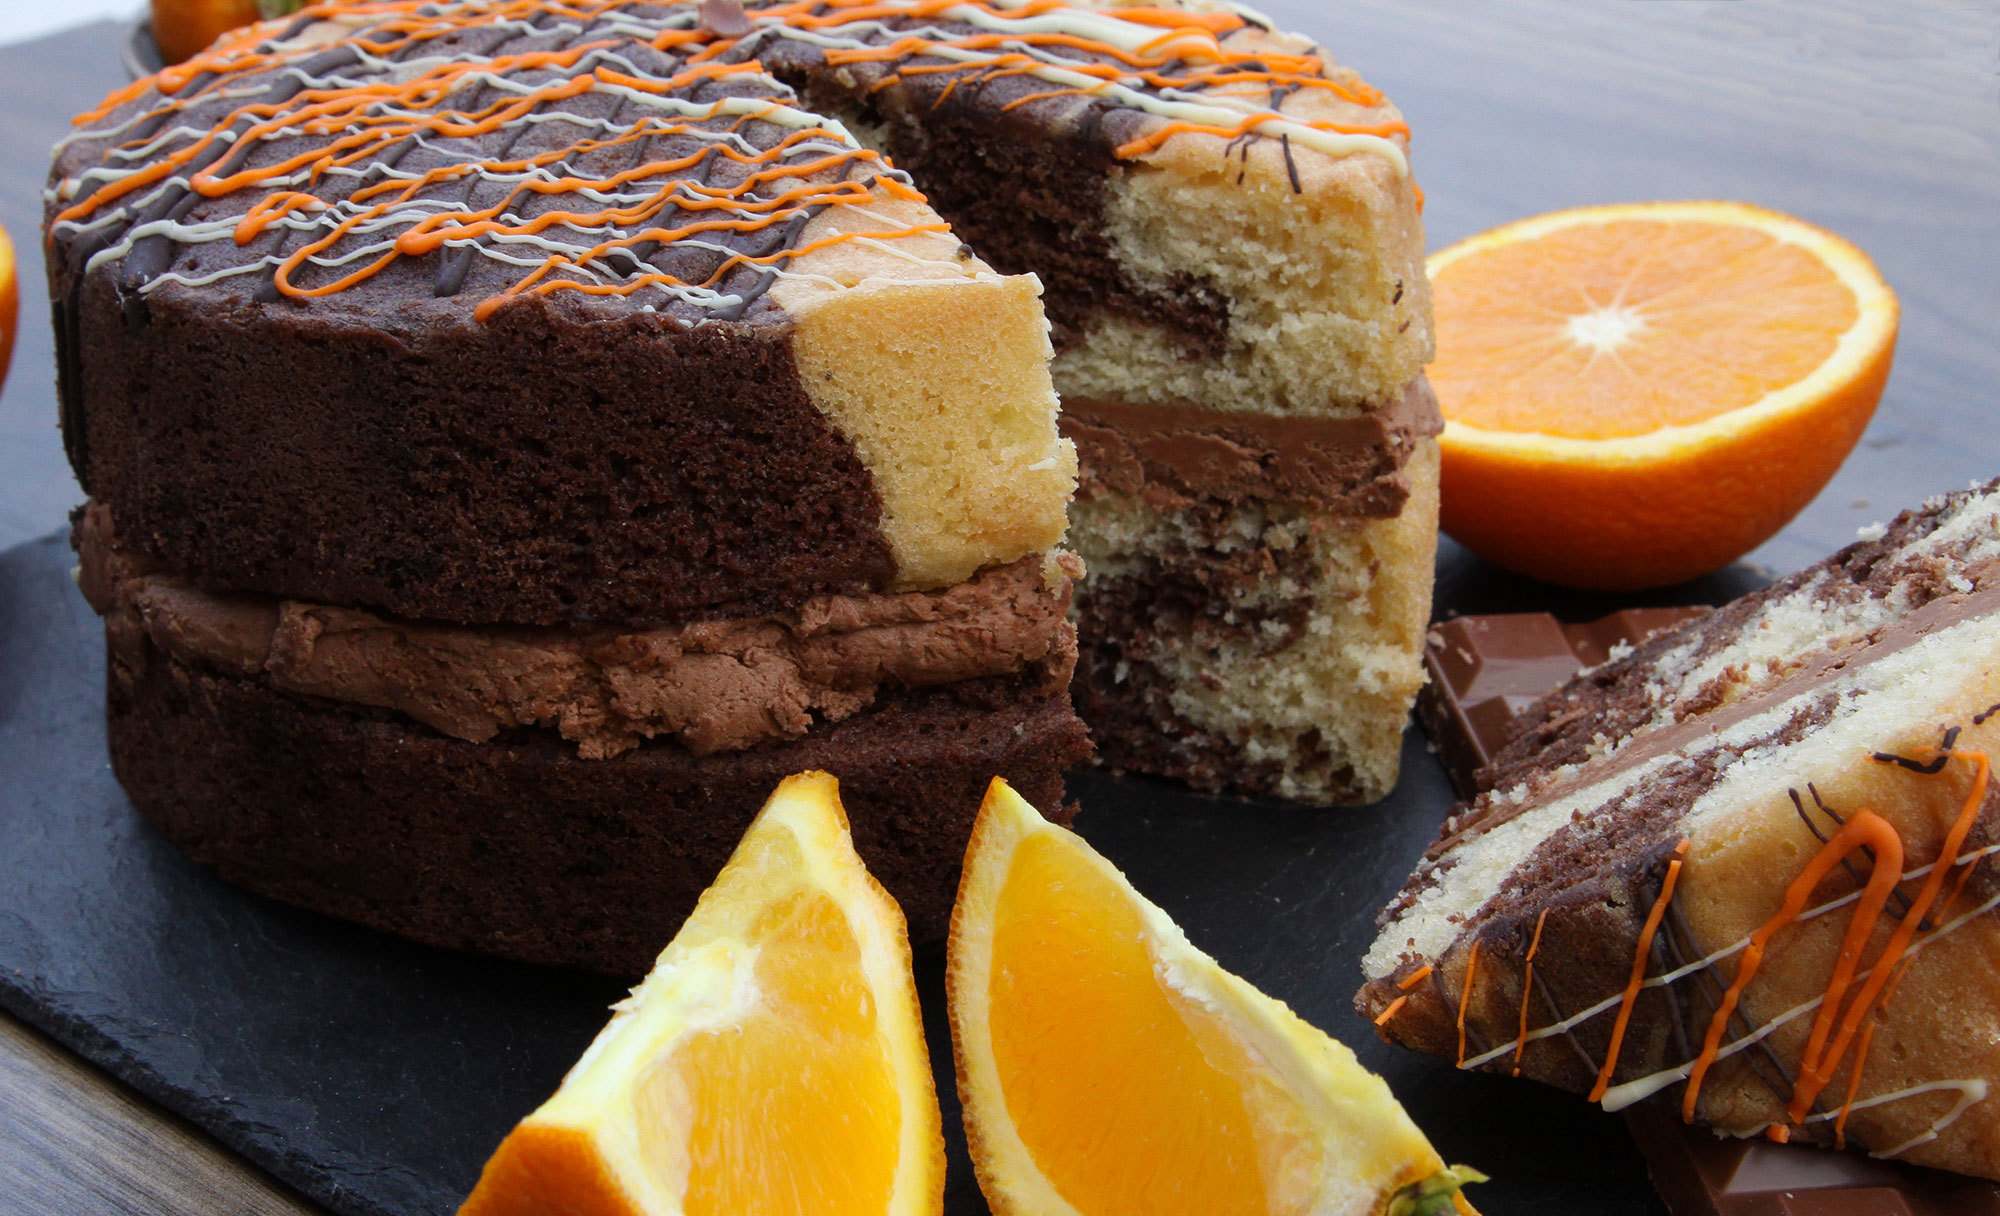 Celebrate the weekend with a Chocolate Orange SPONGE Friday! Order by Thursday 2pm for delivery on Friday! Use code: Sponge Friday, £9.99 for a 7 inch Sponge, £16.99 for a 10 inch.